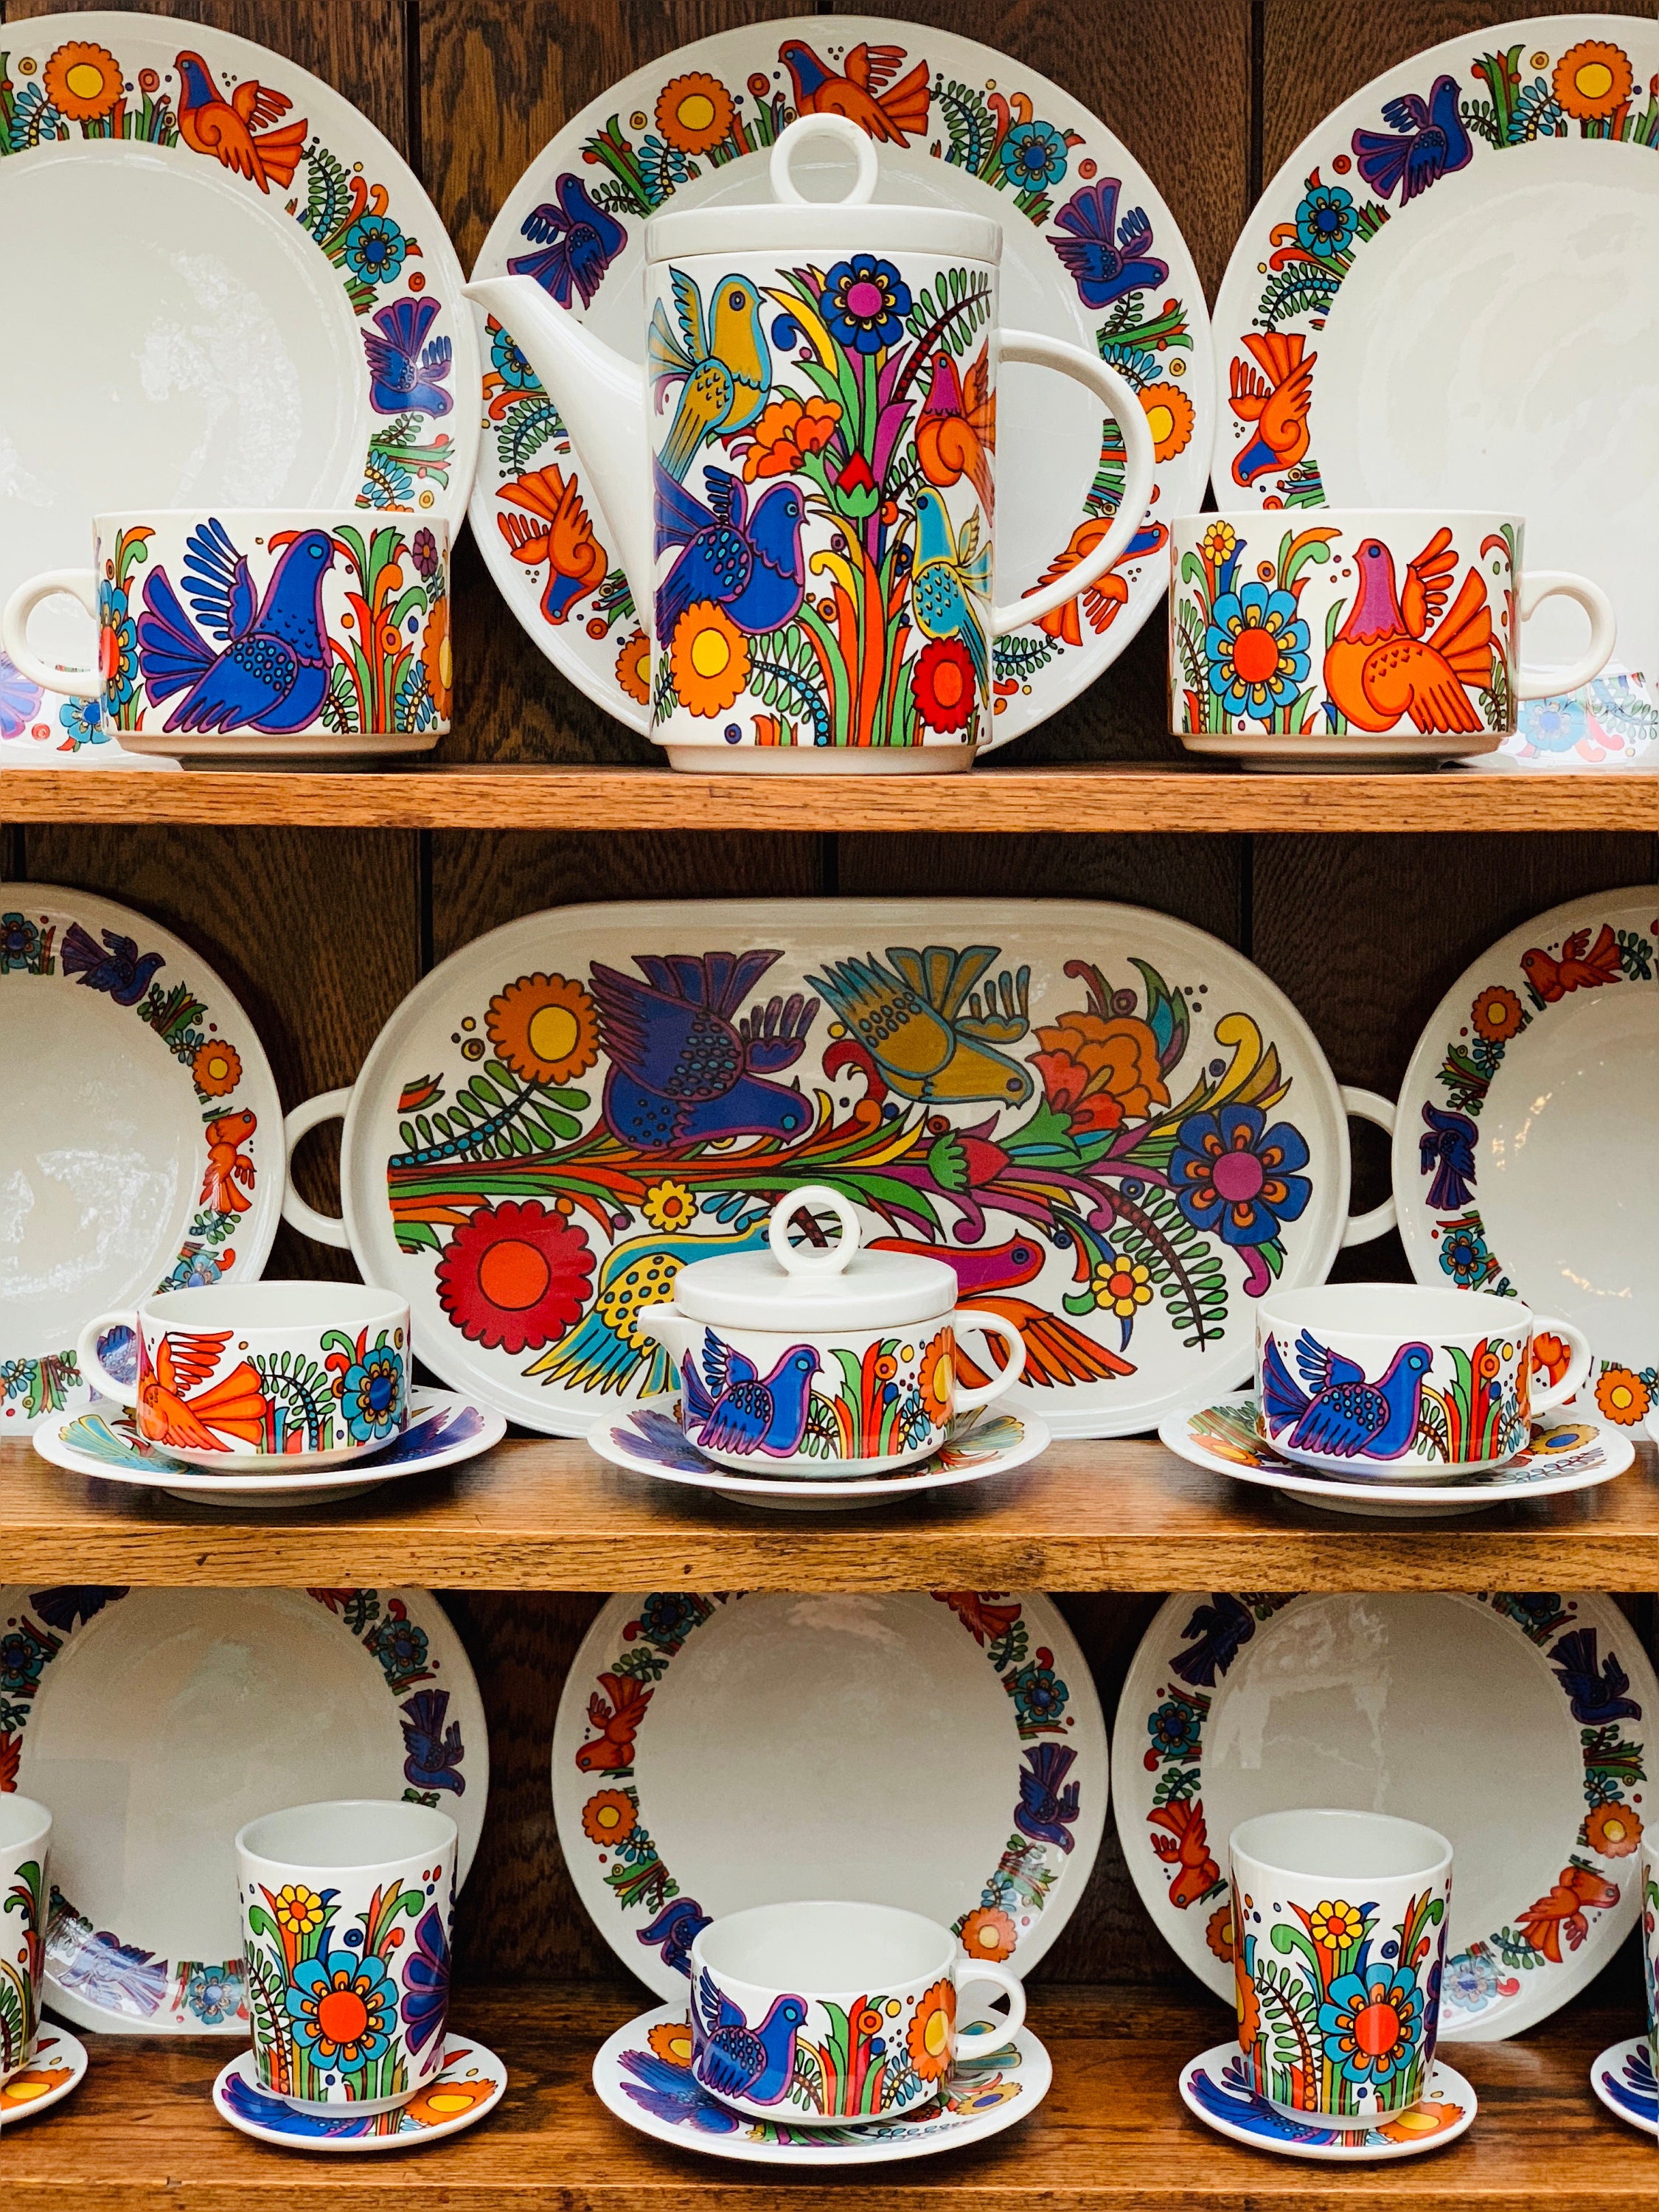 Huge 60-piece Villeroy & Boch Acapulco Collection including Rare Beakers, Coffee Enamel Pans and Serving Tray